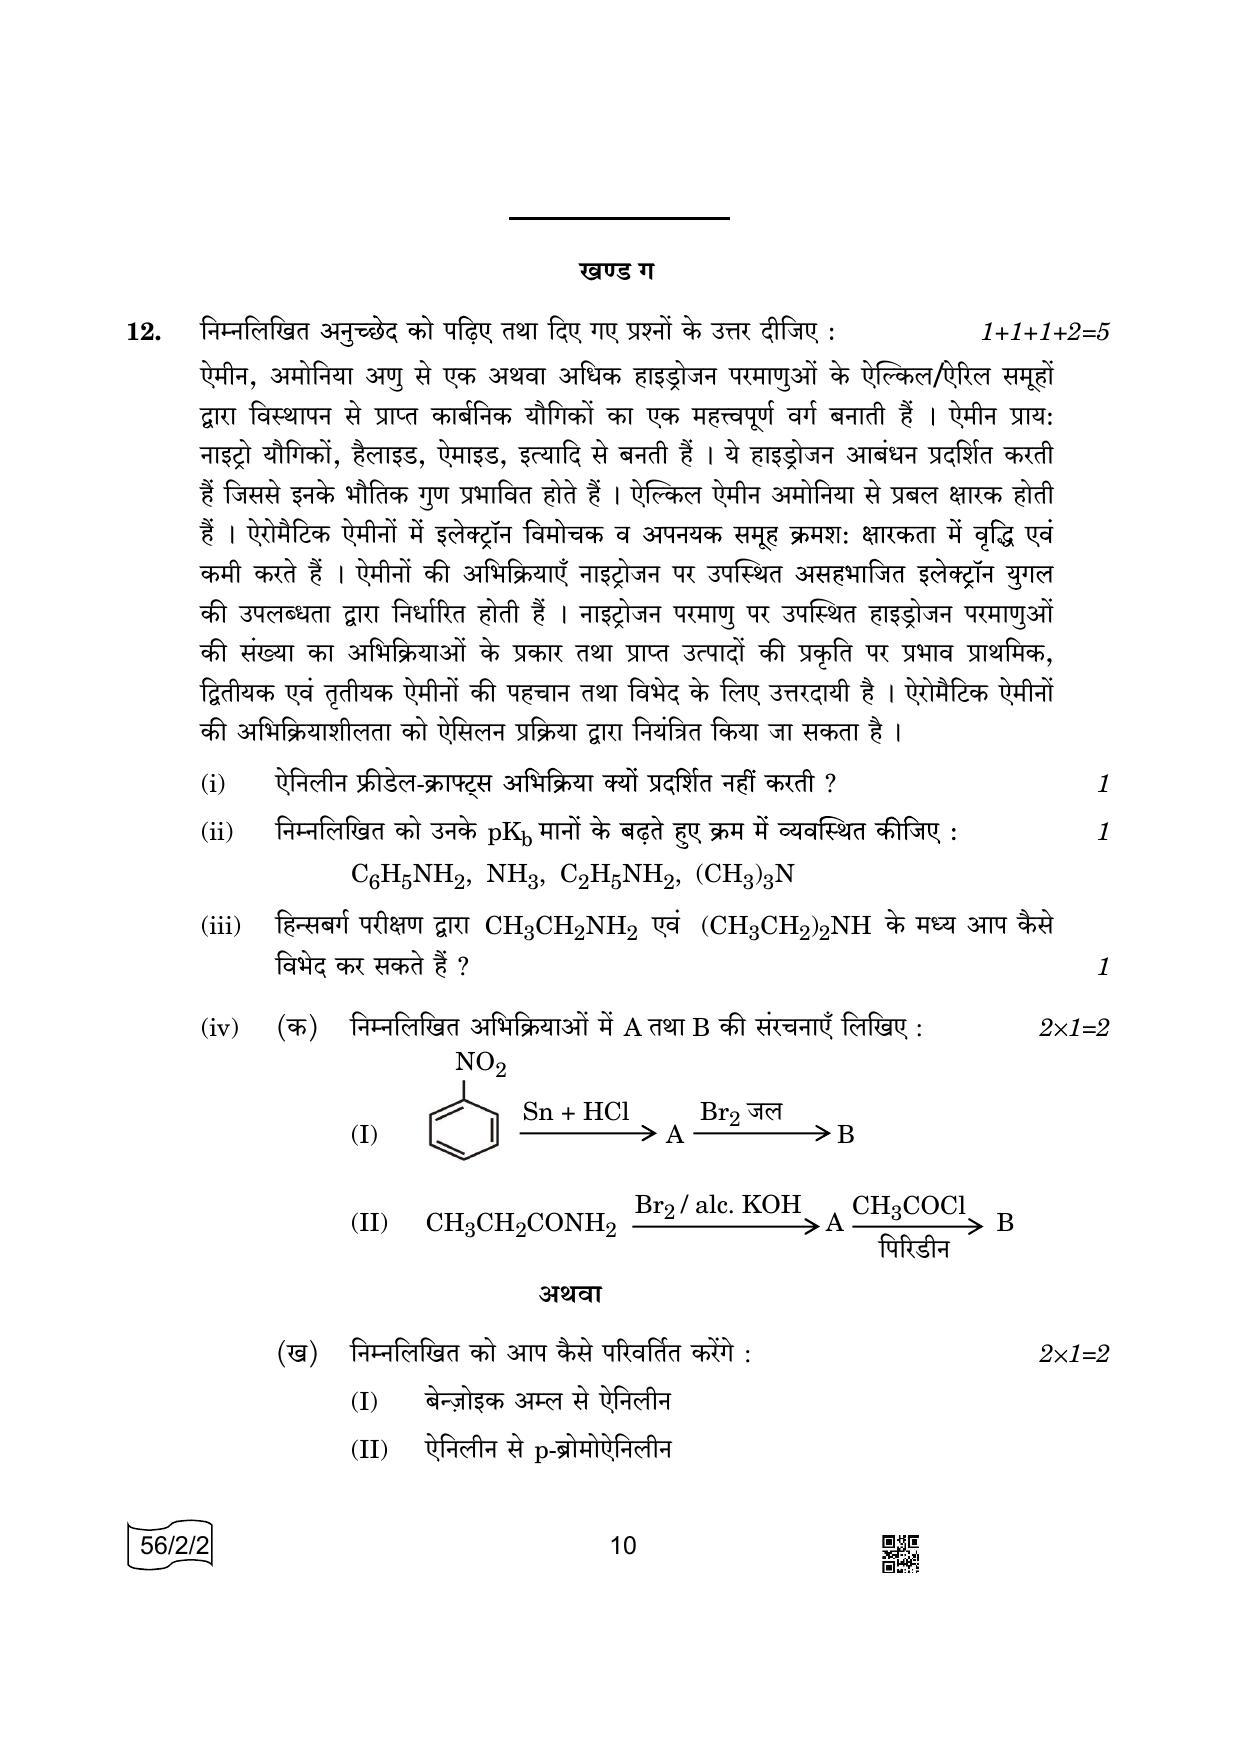 CBSE Class 12 56-2-2 Chemistry 2022 Question Paper - Page 10